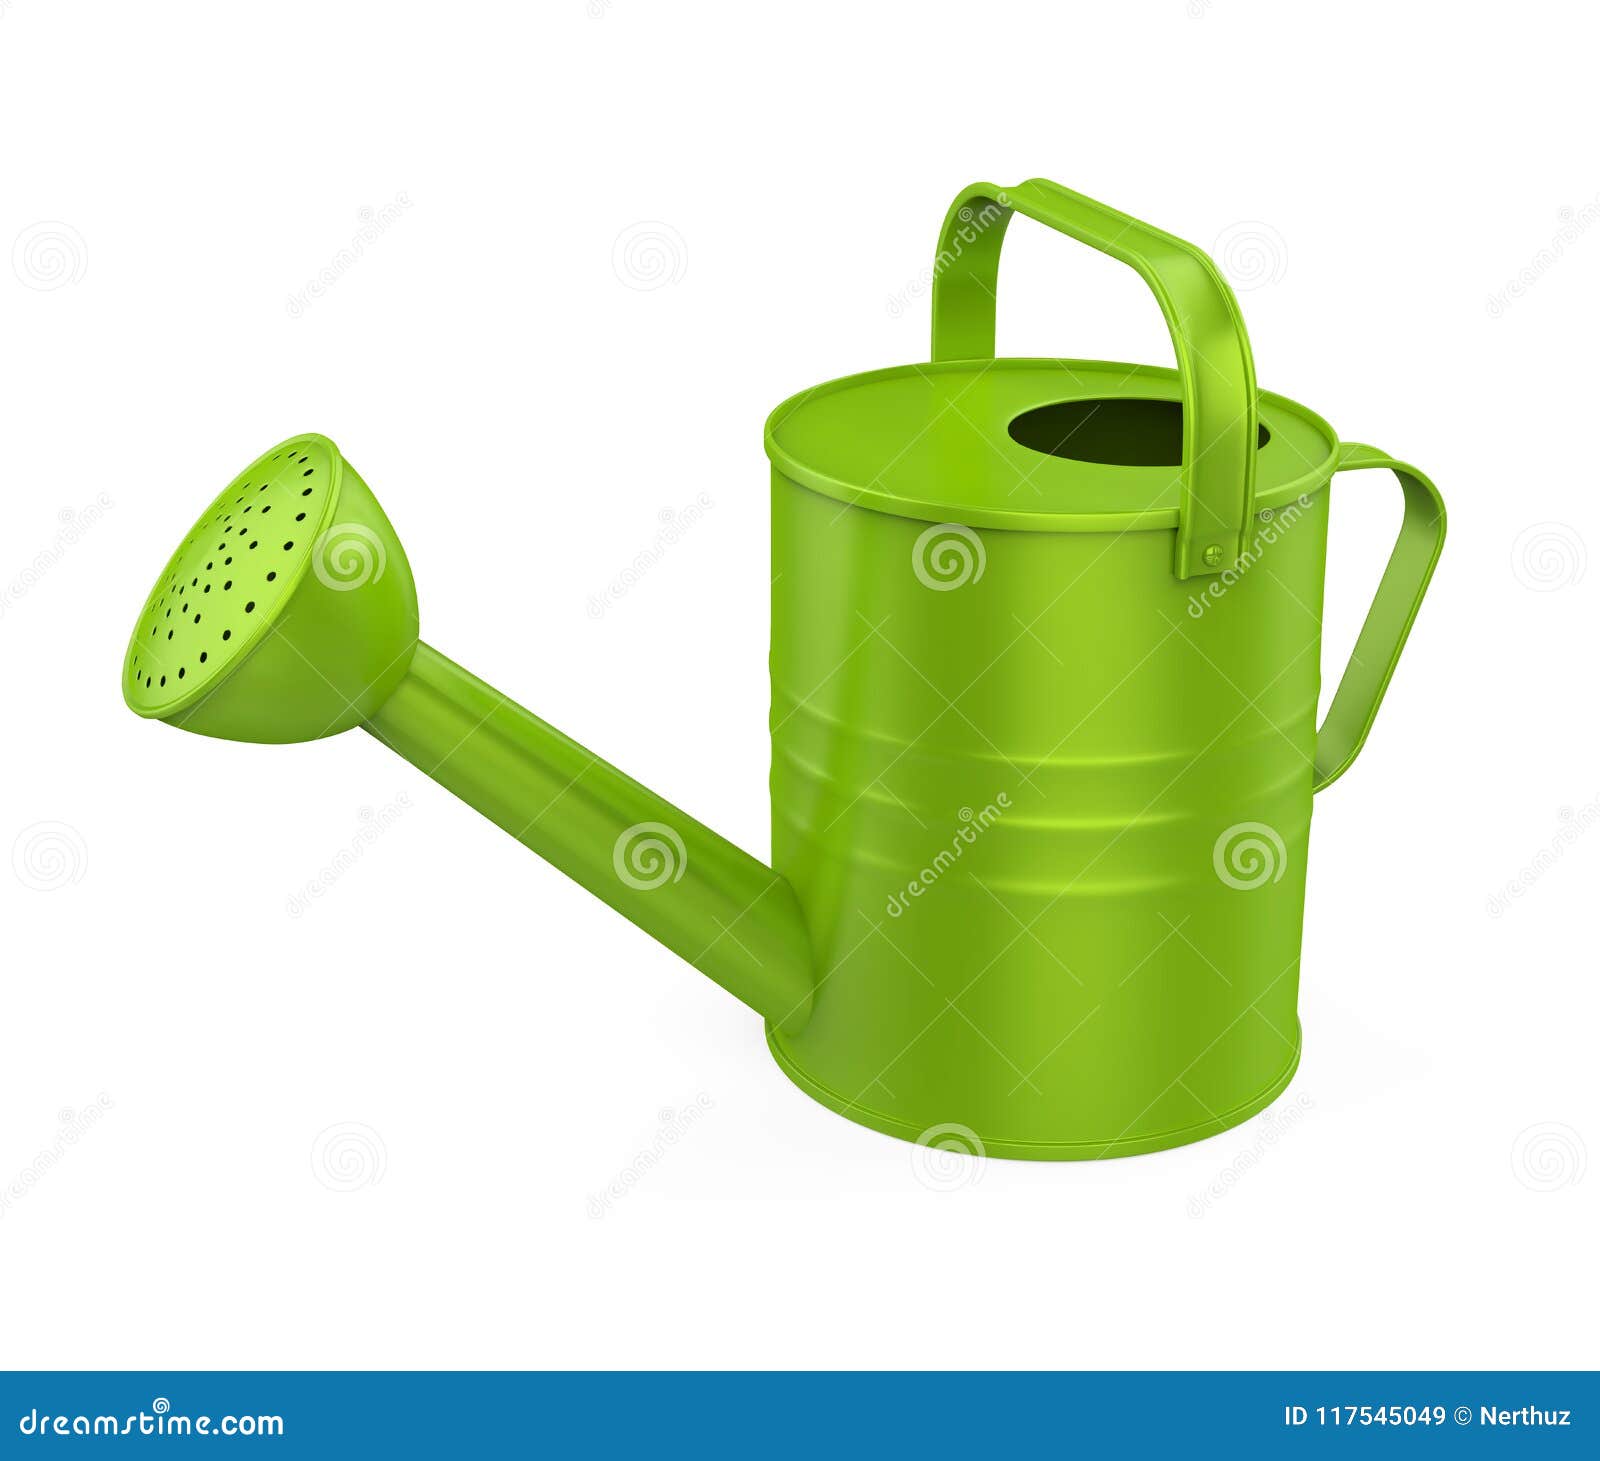 Watering Can Isolated stock illustration. Illustration of garden ...